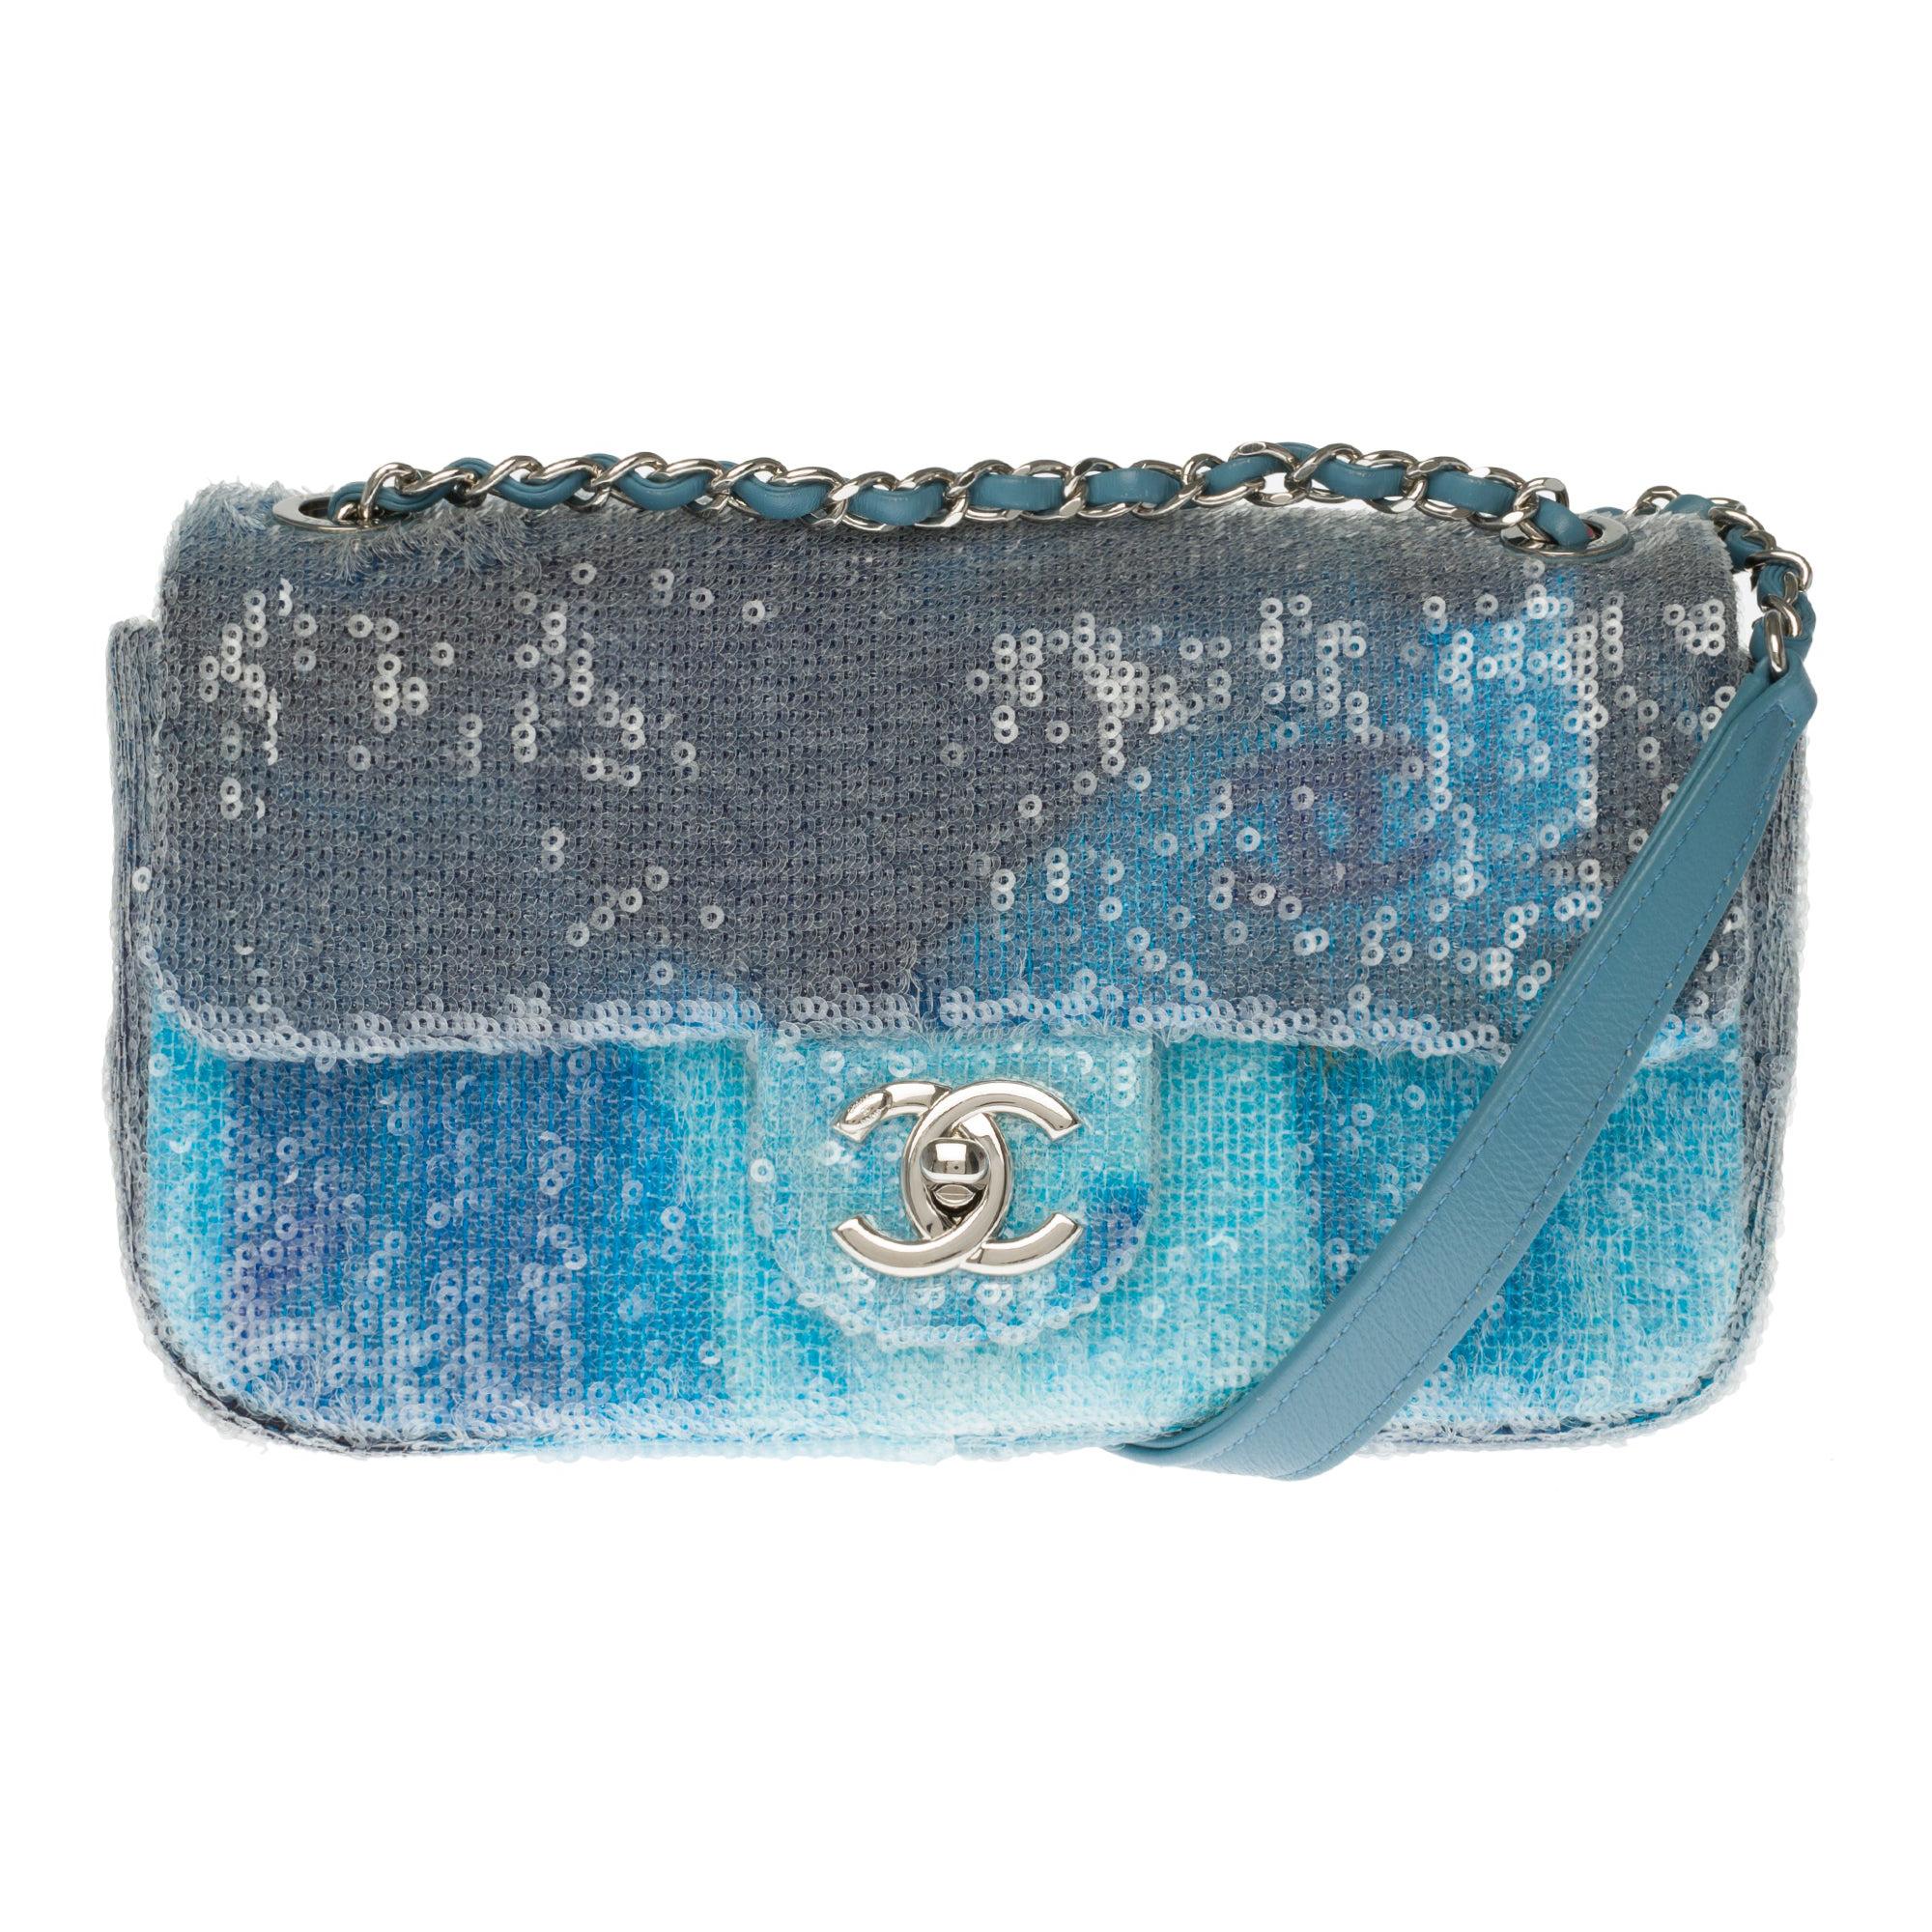 The Rare Chanel Timeless Runaway Waterfalls Shoulder bag in blue sequins ,  SHW